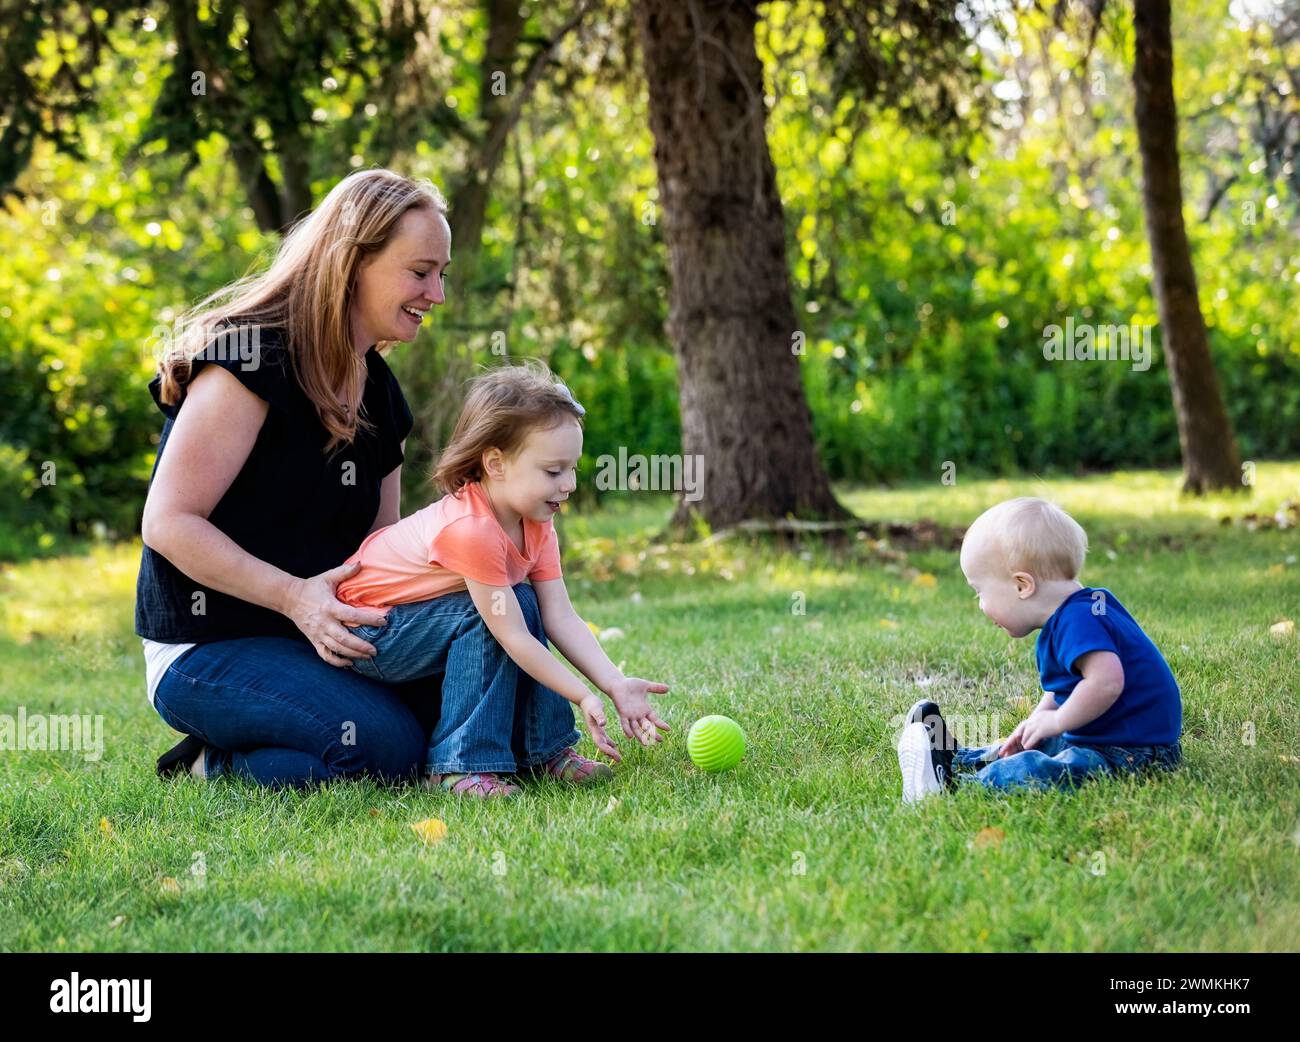 Mother throwing a ball with her daughter, and her young son who has Down Syndrome, in a city park during a warm fall afternoon; Leduc, Alberta, Canada Stock Photo